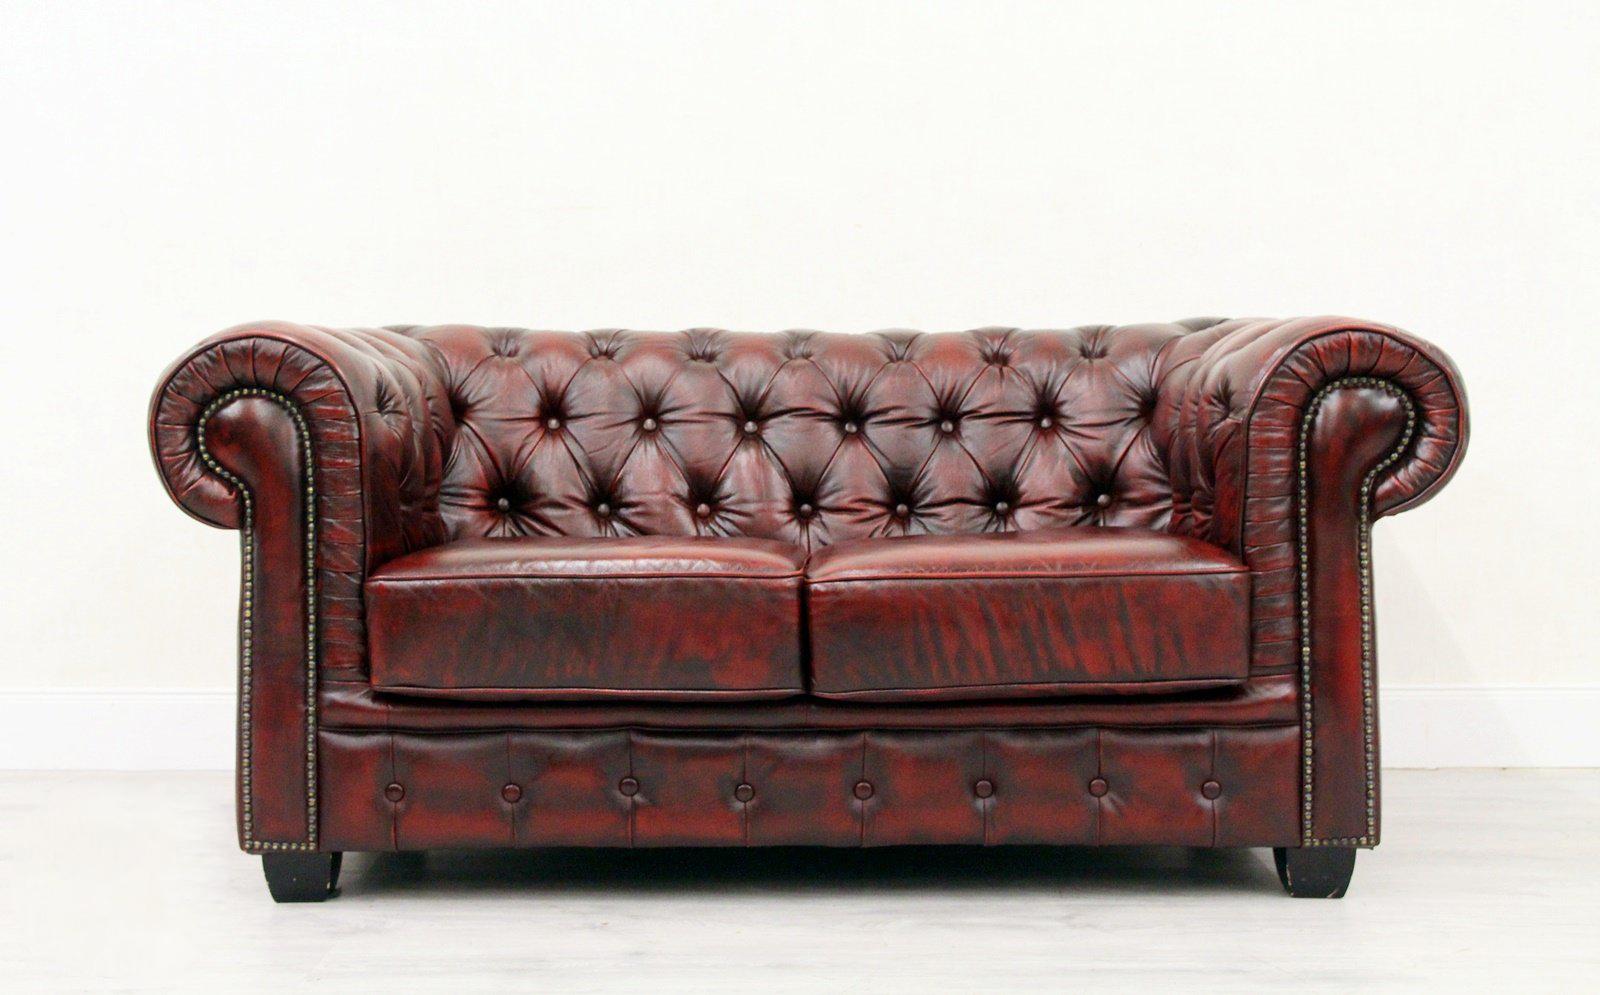 Chesterfield real leather 3-seat 2-seat sofa and armchair
in original design

Condition: The set is in a very good condition
Measures: Sofa 3er
Height x 78cm, length x 210cm, depth x 95cm
Sofa 2er
Height x 78cm, length x 170cm, depth x